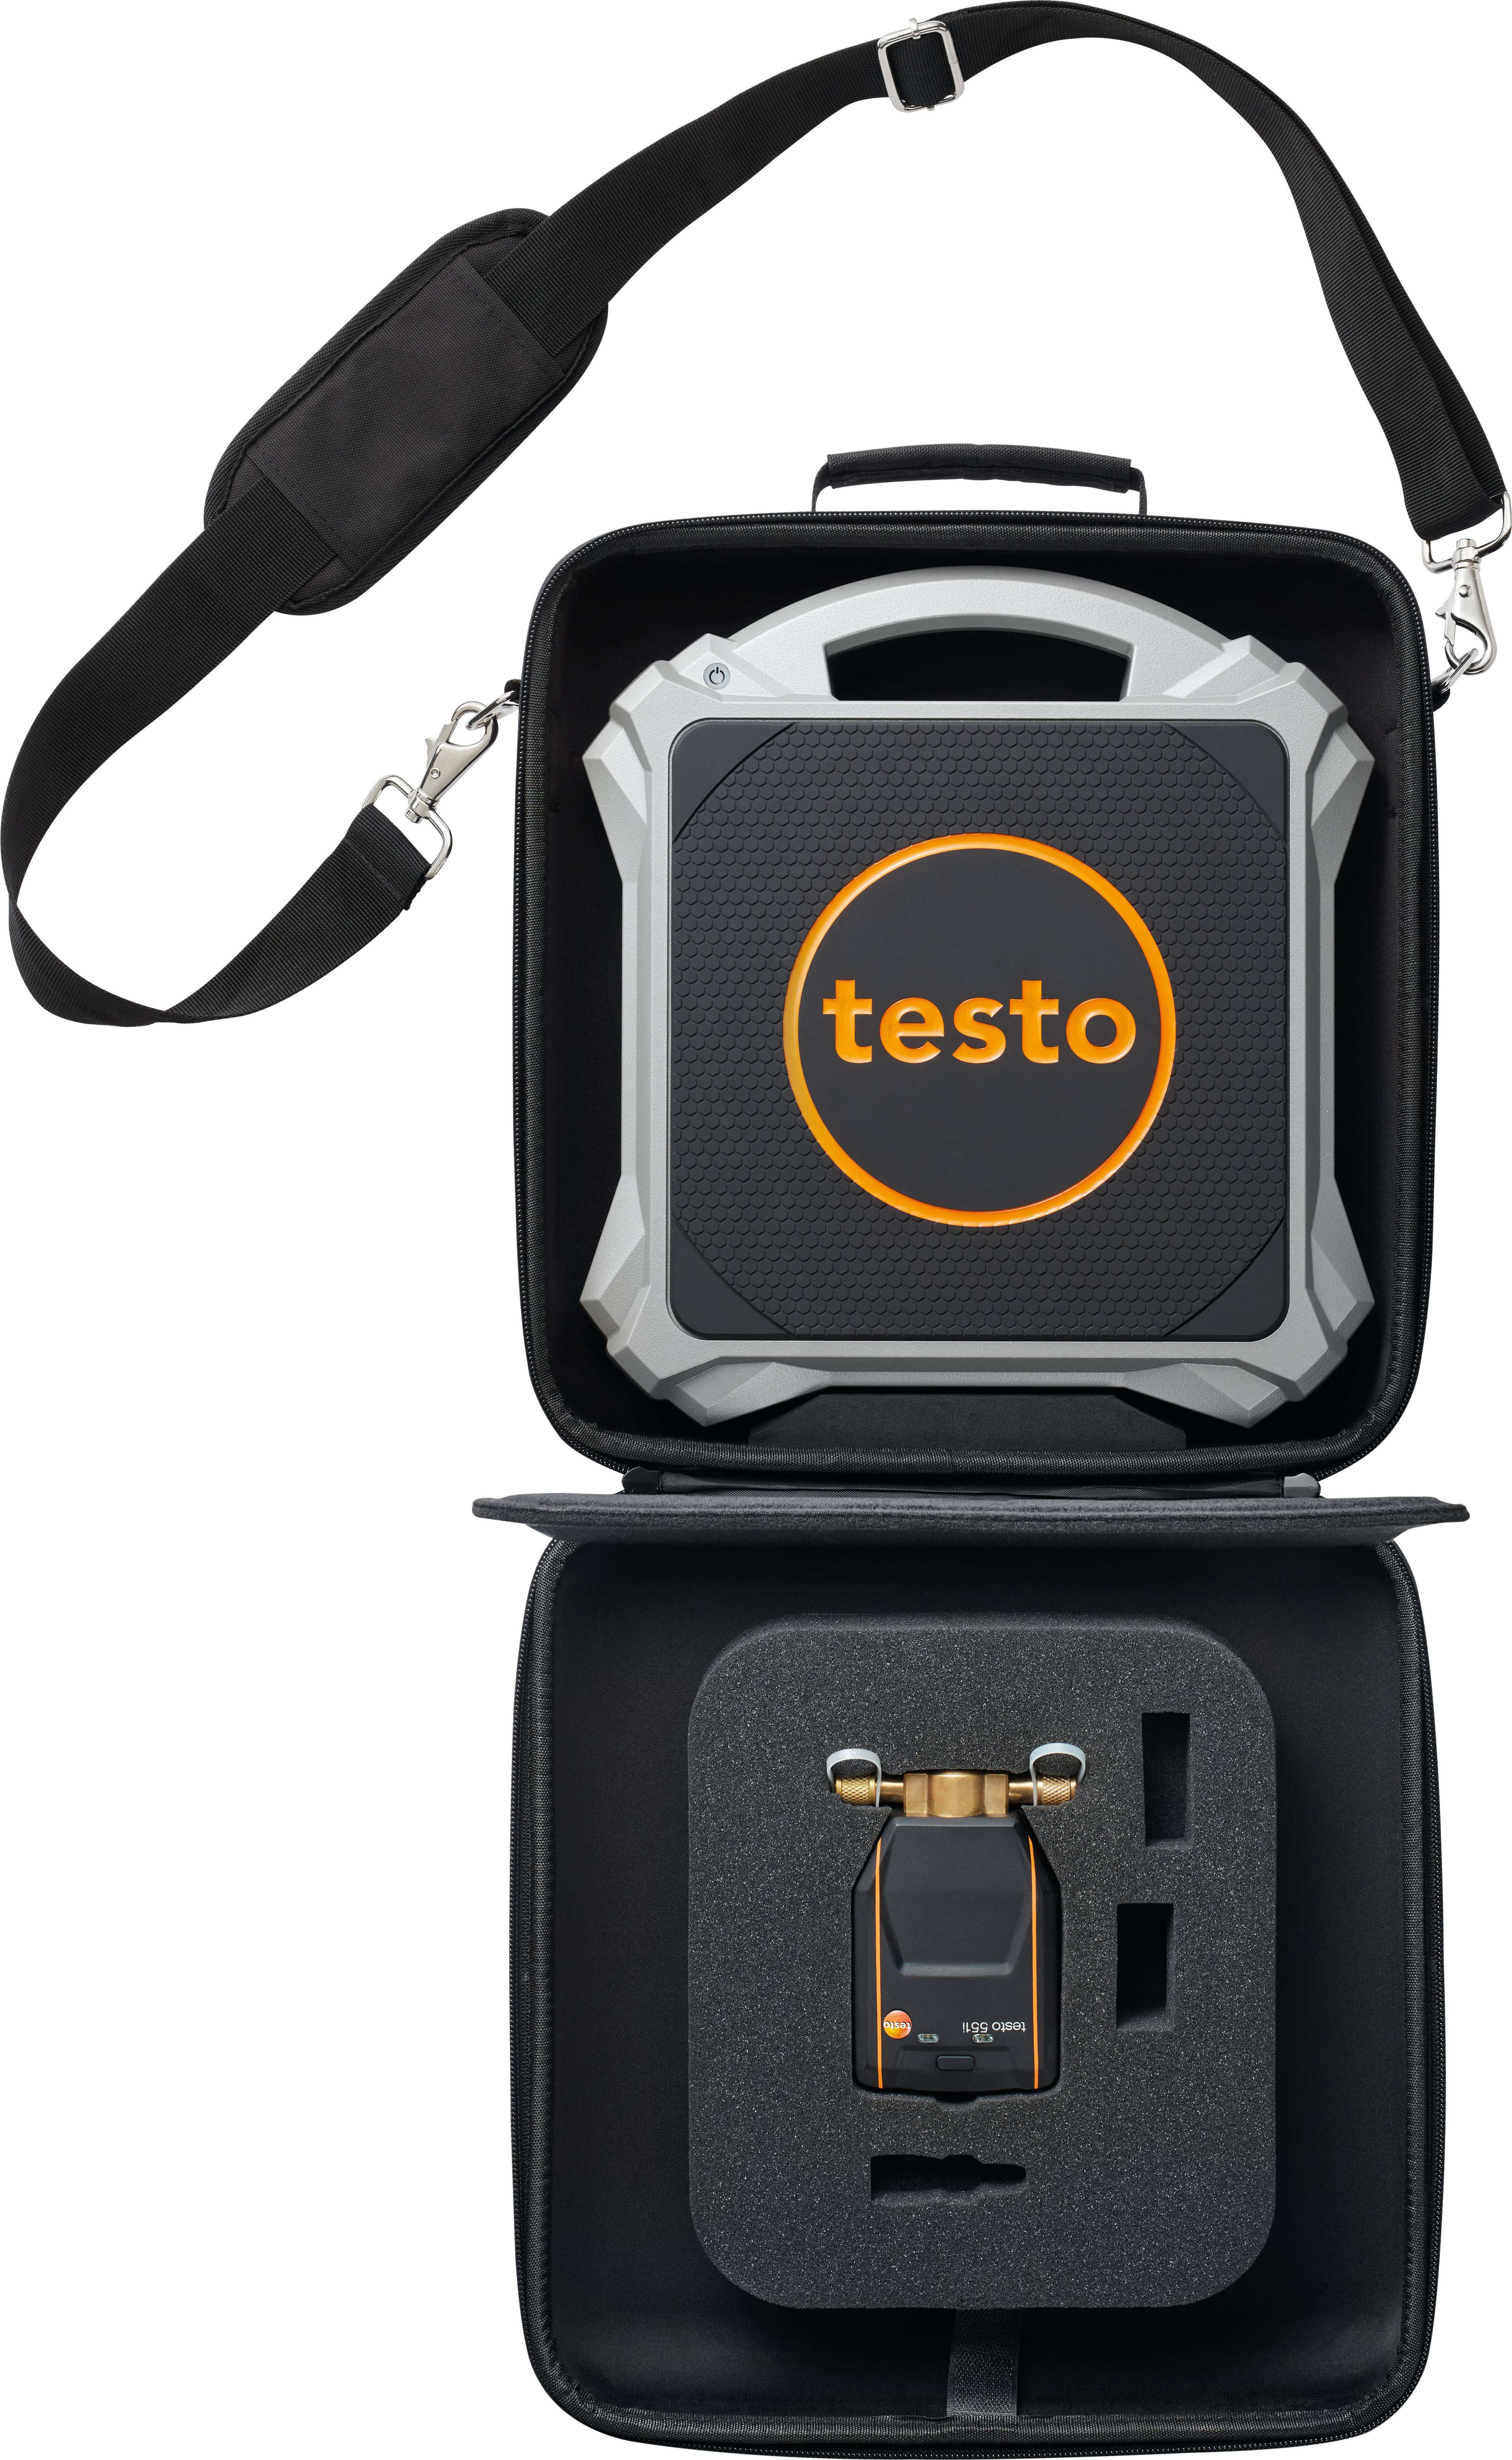 Testo 560i Kit - Digital Refrigerant Scale and Intelligent Valve with Bluetooth and Bag